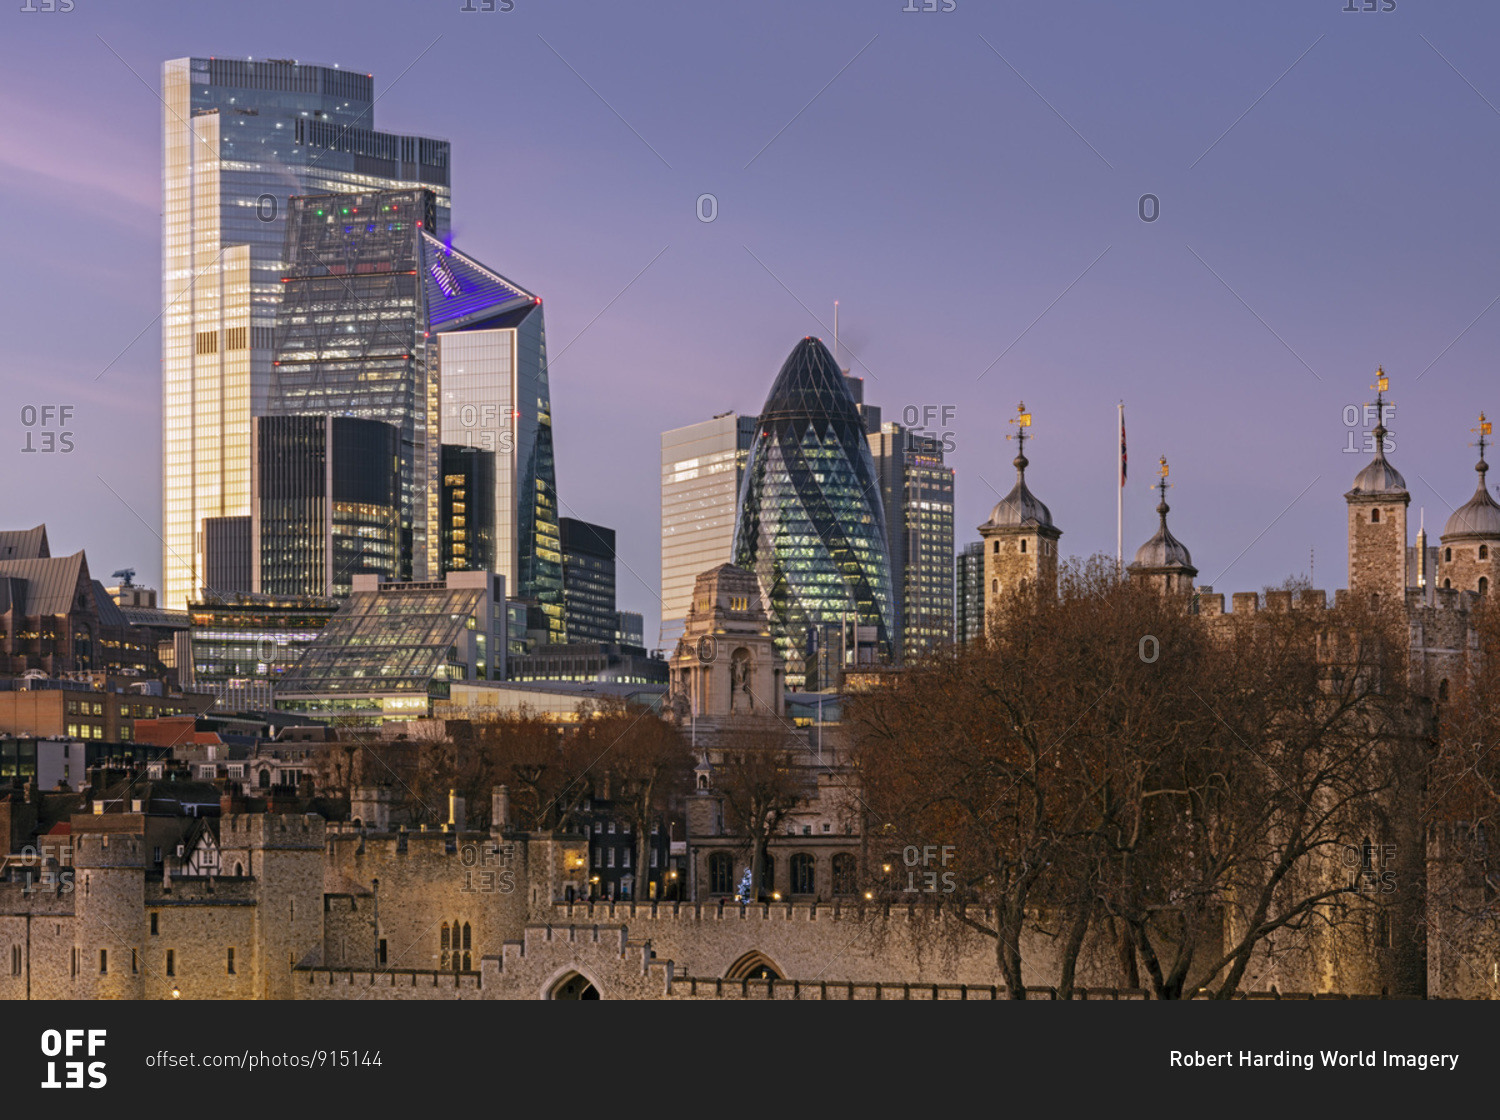 City of London skyline with The Tower of London, the Gherkin, Scalpel and Twenty Two Bishopsgate, the tallest building in the City, London, England, United Kingdom, Europe